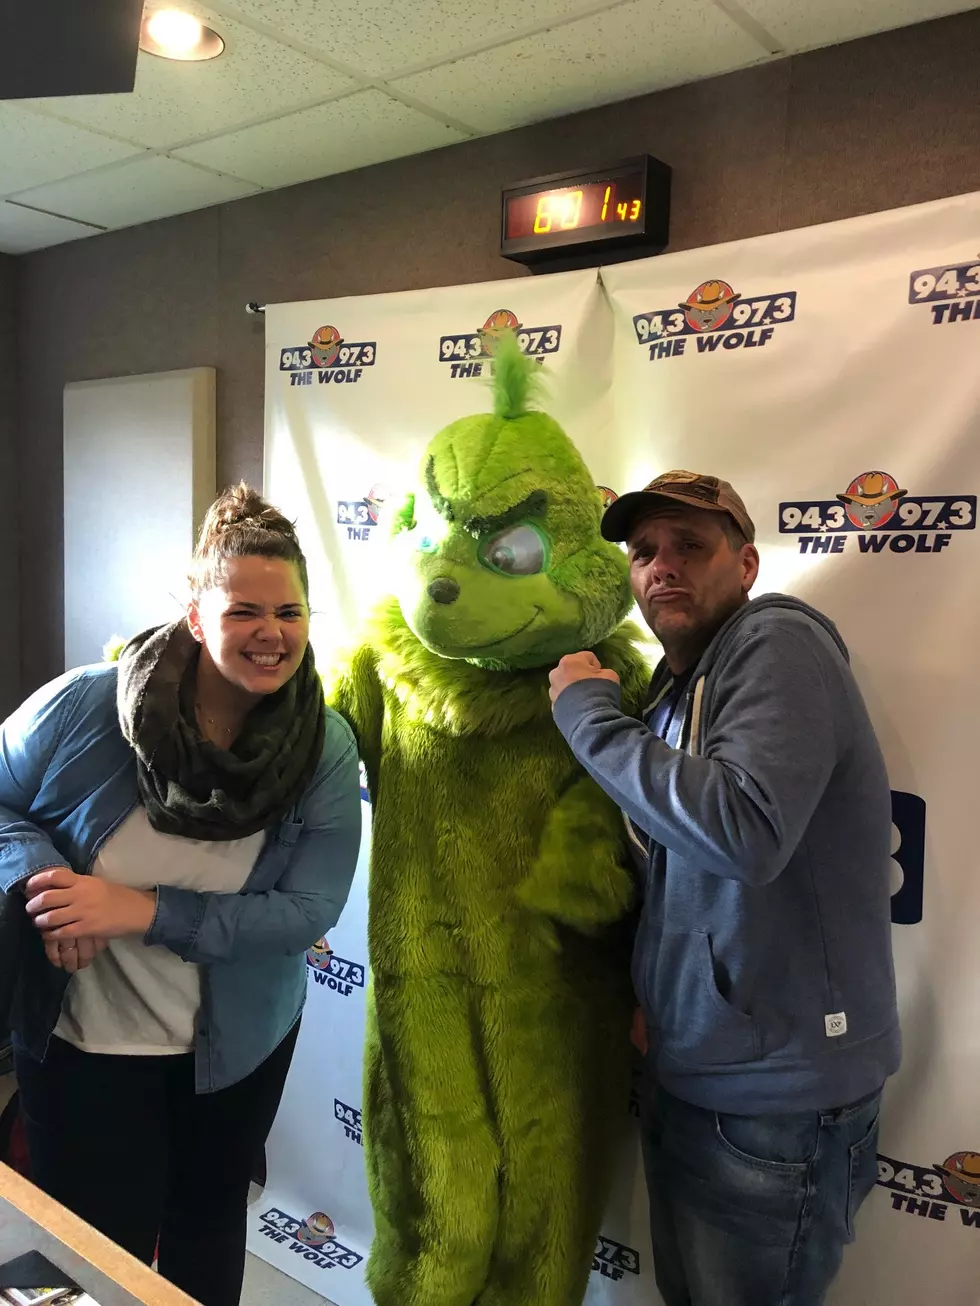 The Grinch Got Into the Wolf Studios (VIDEO)